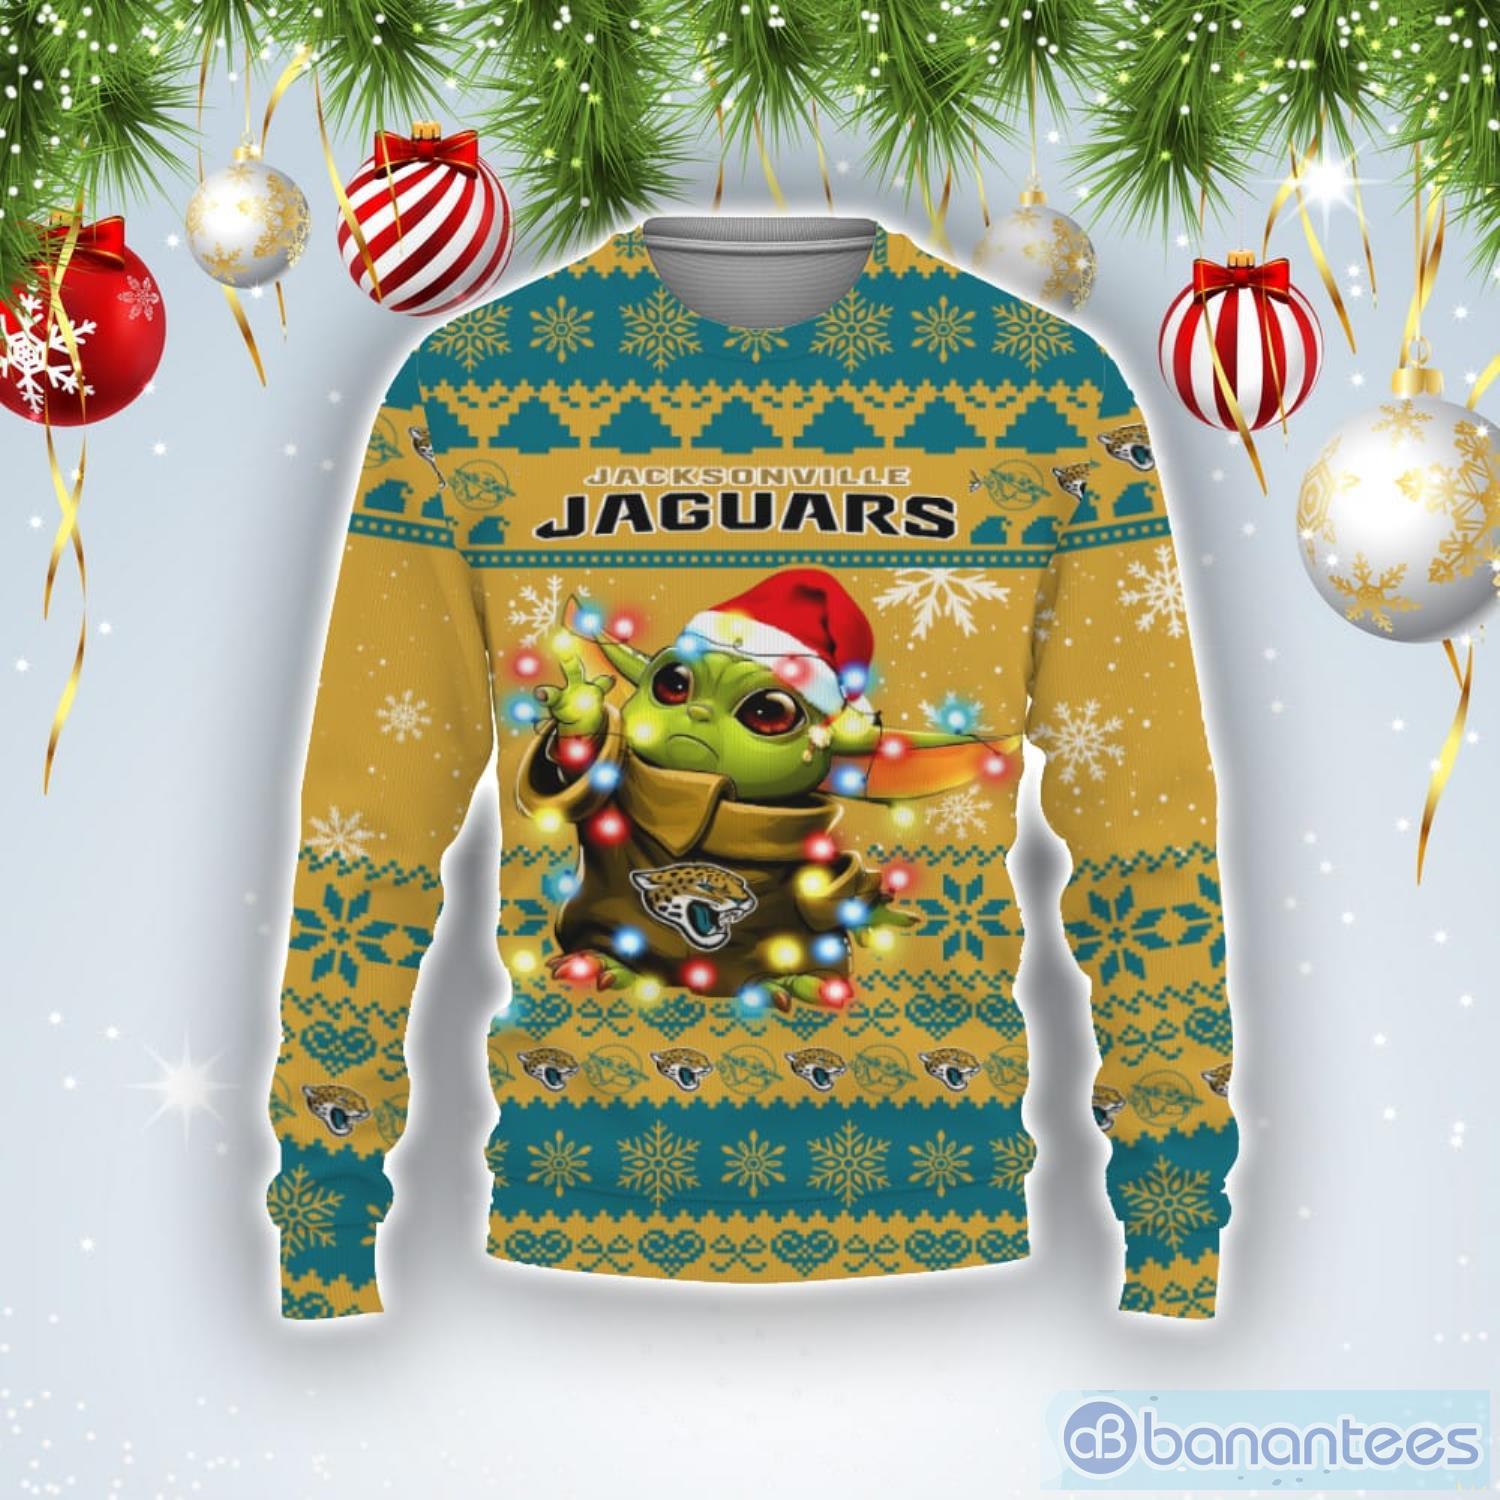 Jacksonville Jaguars Baby Yoda Star Wars Sports Football American Ugly Christmas Sweater Product Photo 1